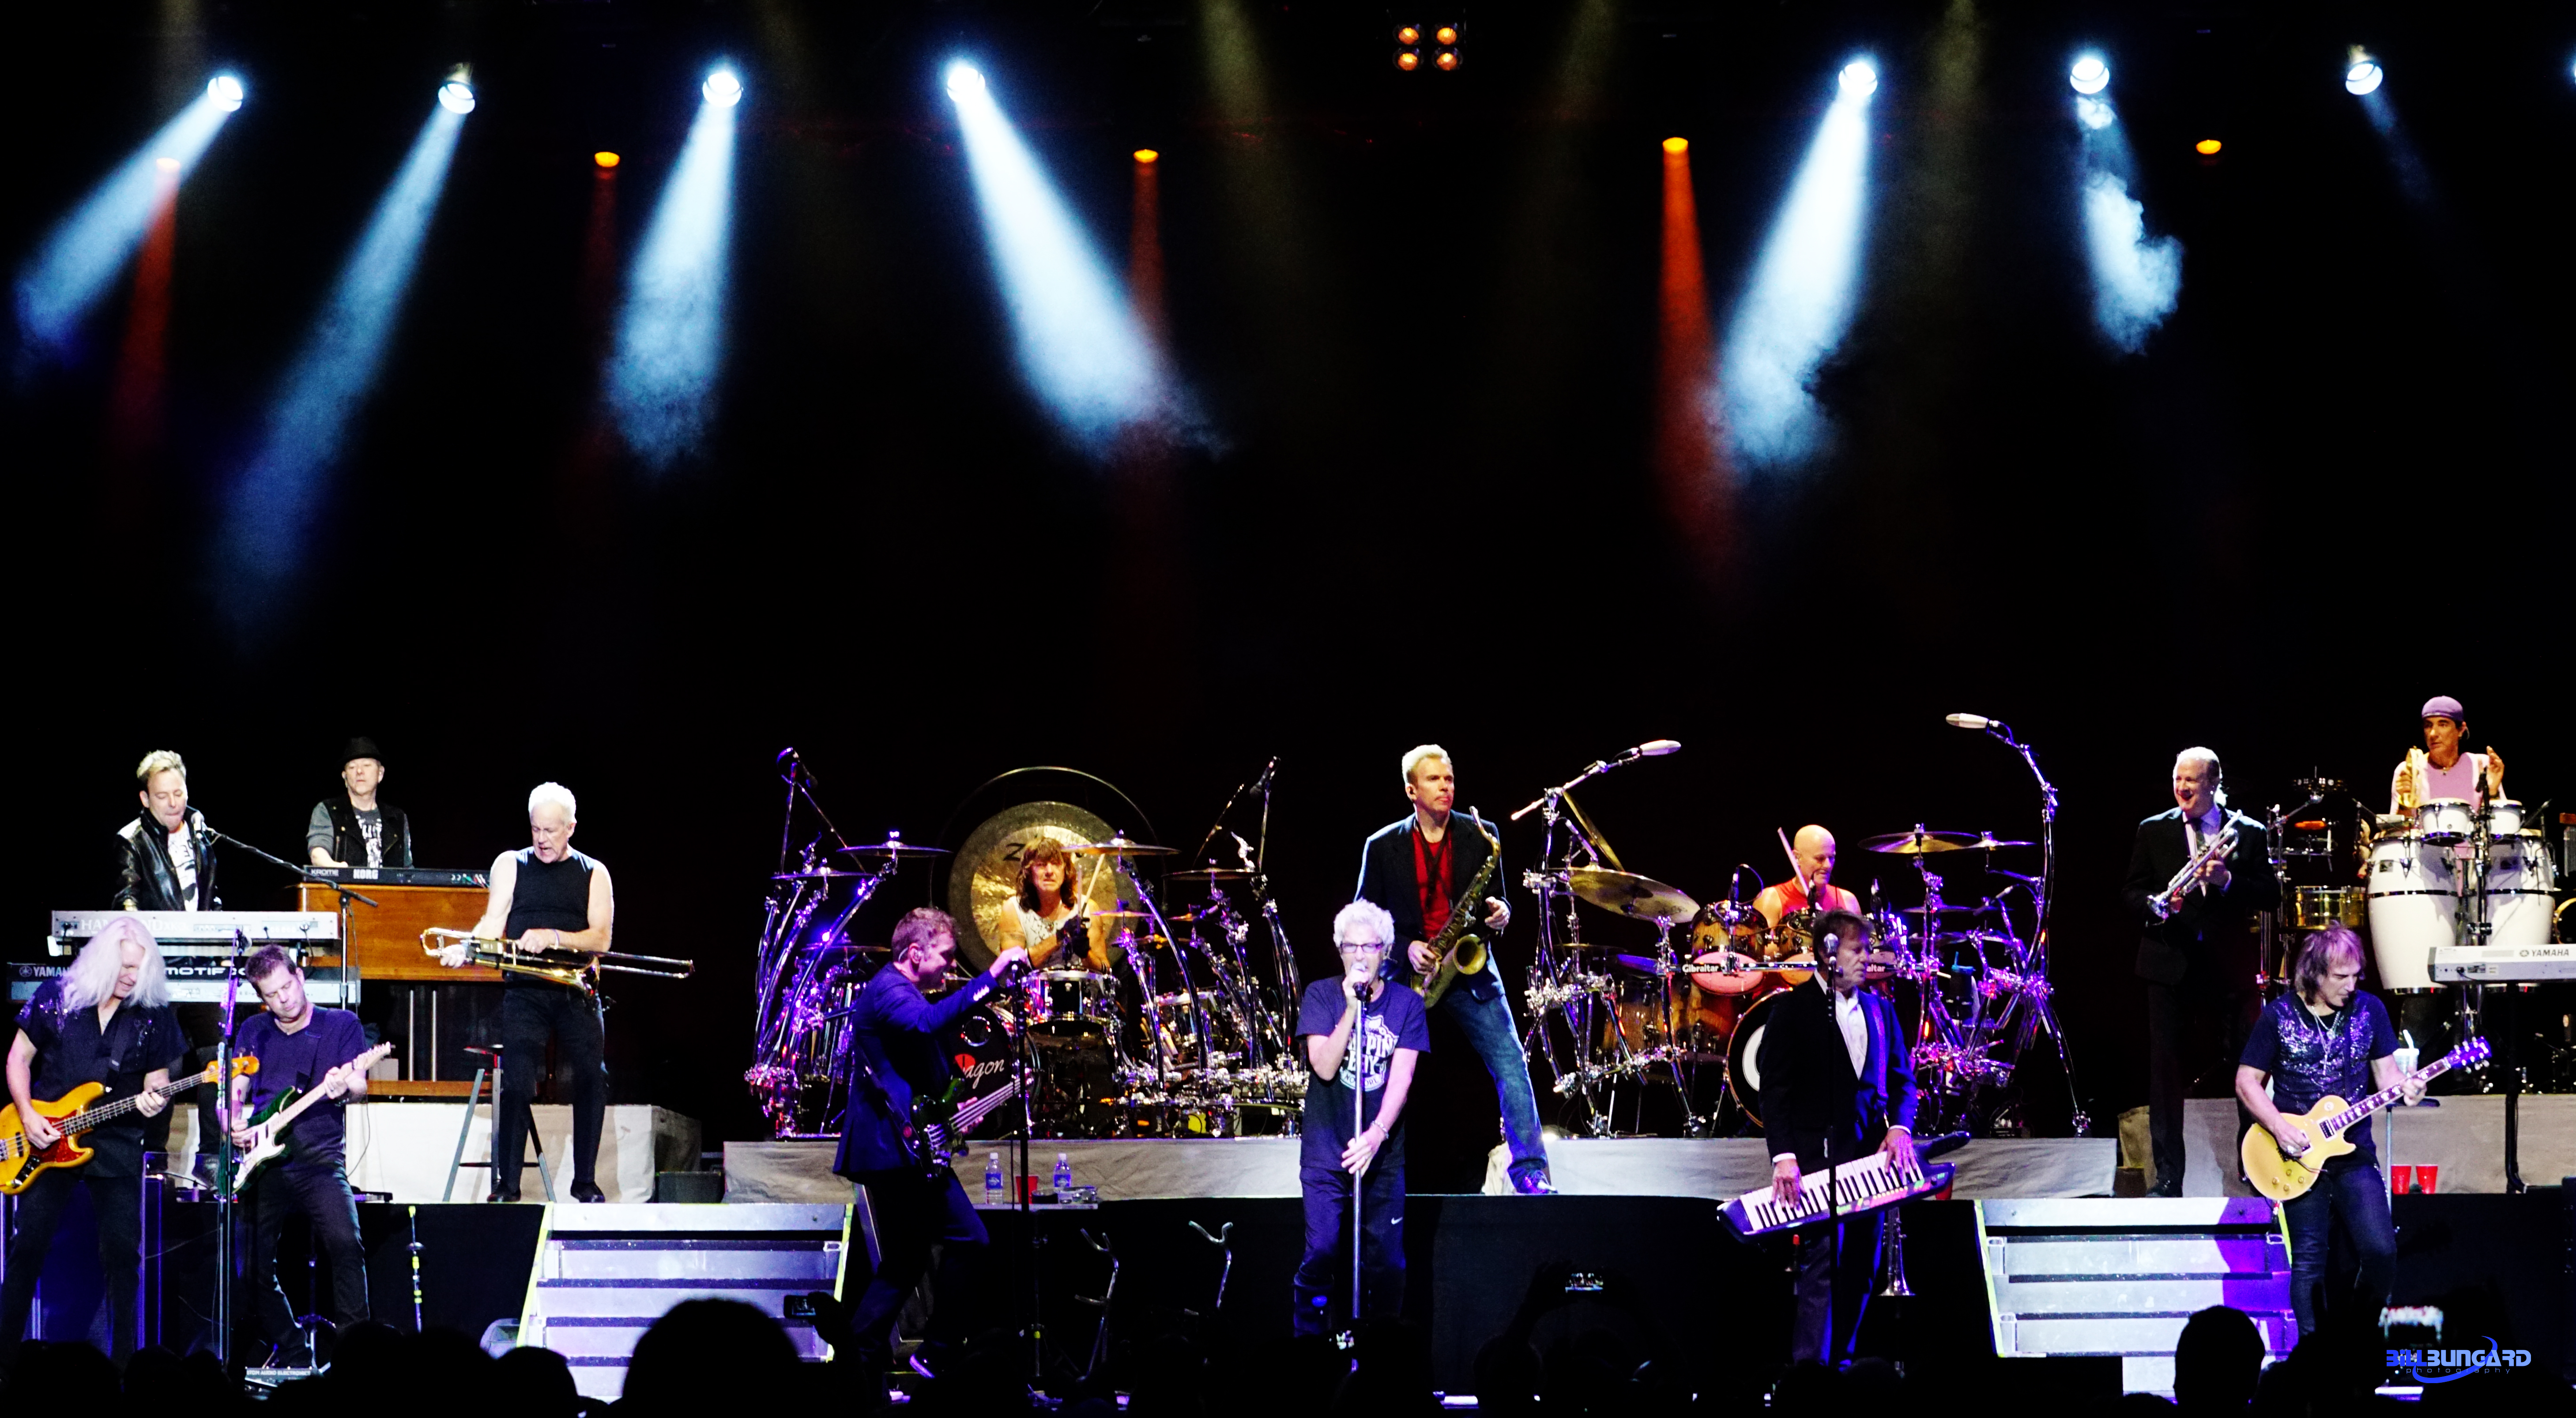 Chicago and REO Speedwagon at The Washington State Fair (Photo by Bill Bungard)